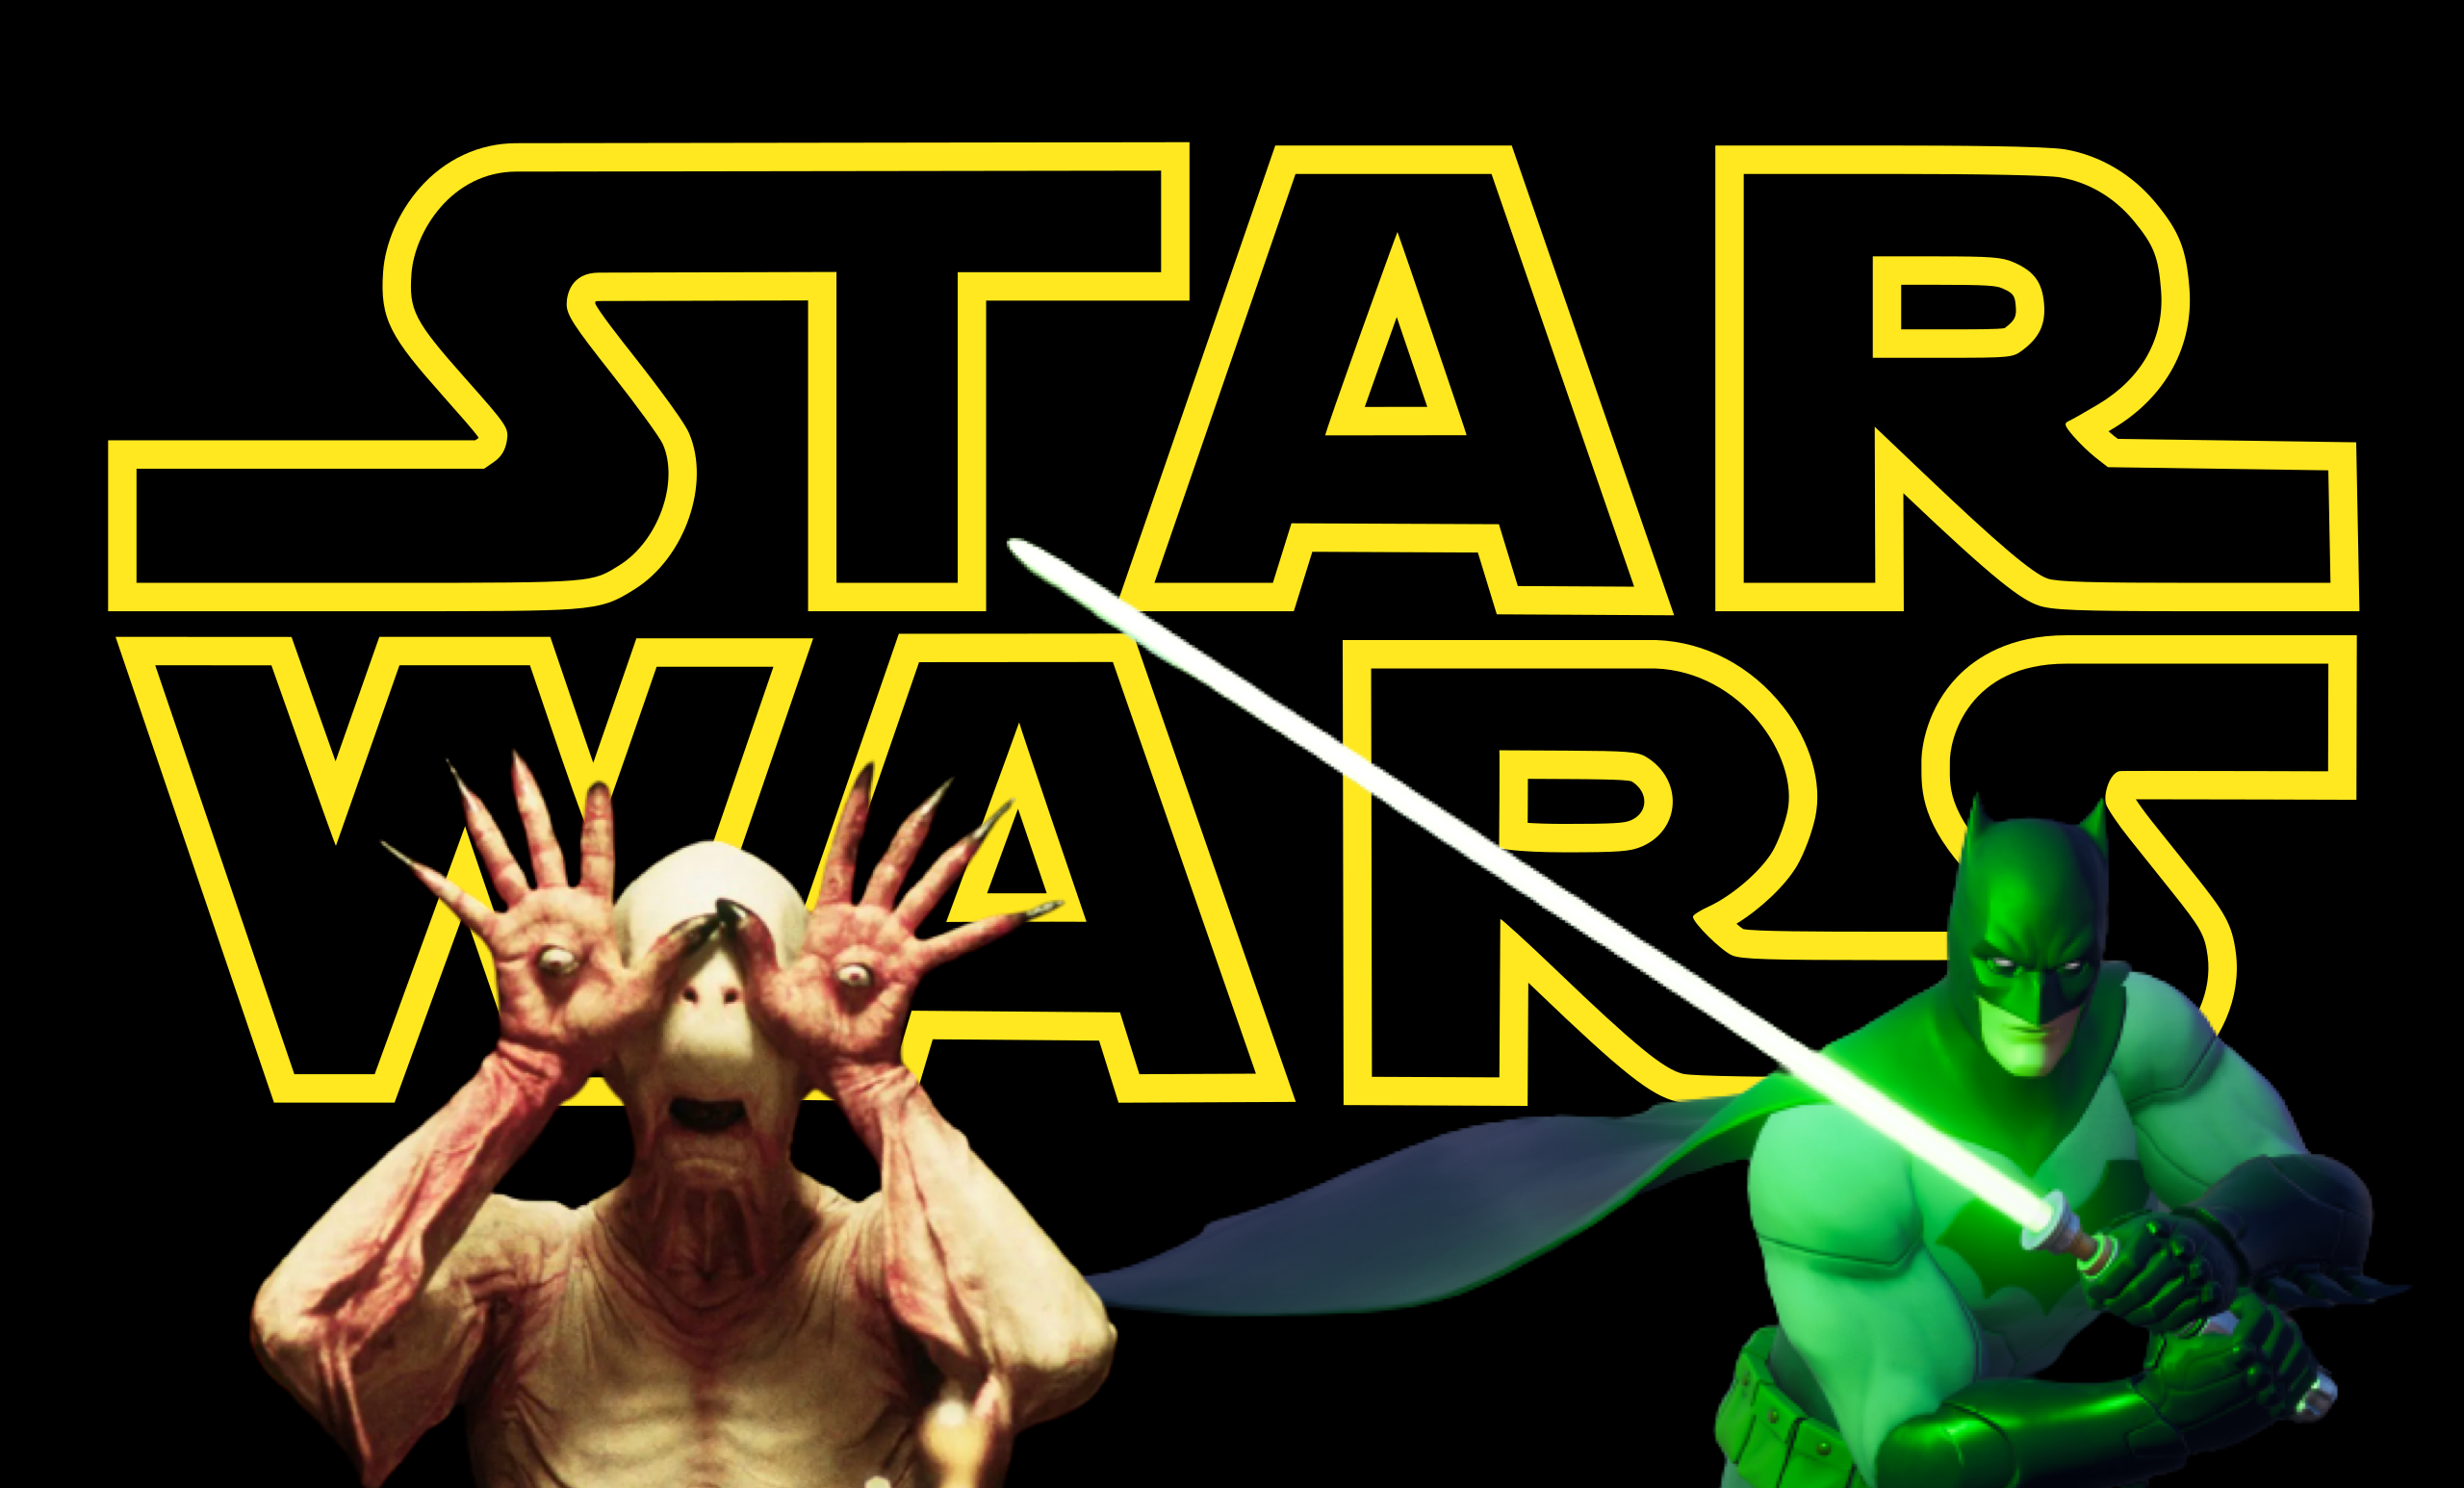 Guillermo Del Toro, David S. Goyer Tease The Star Wars Film They Never Made